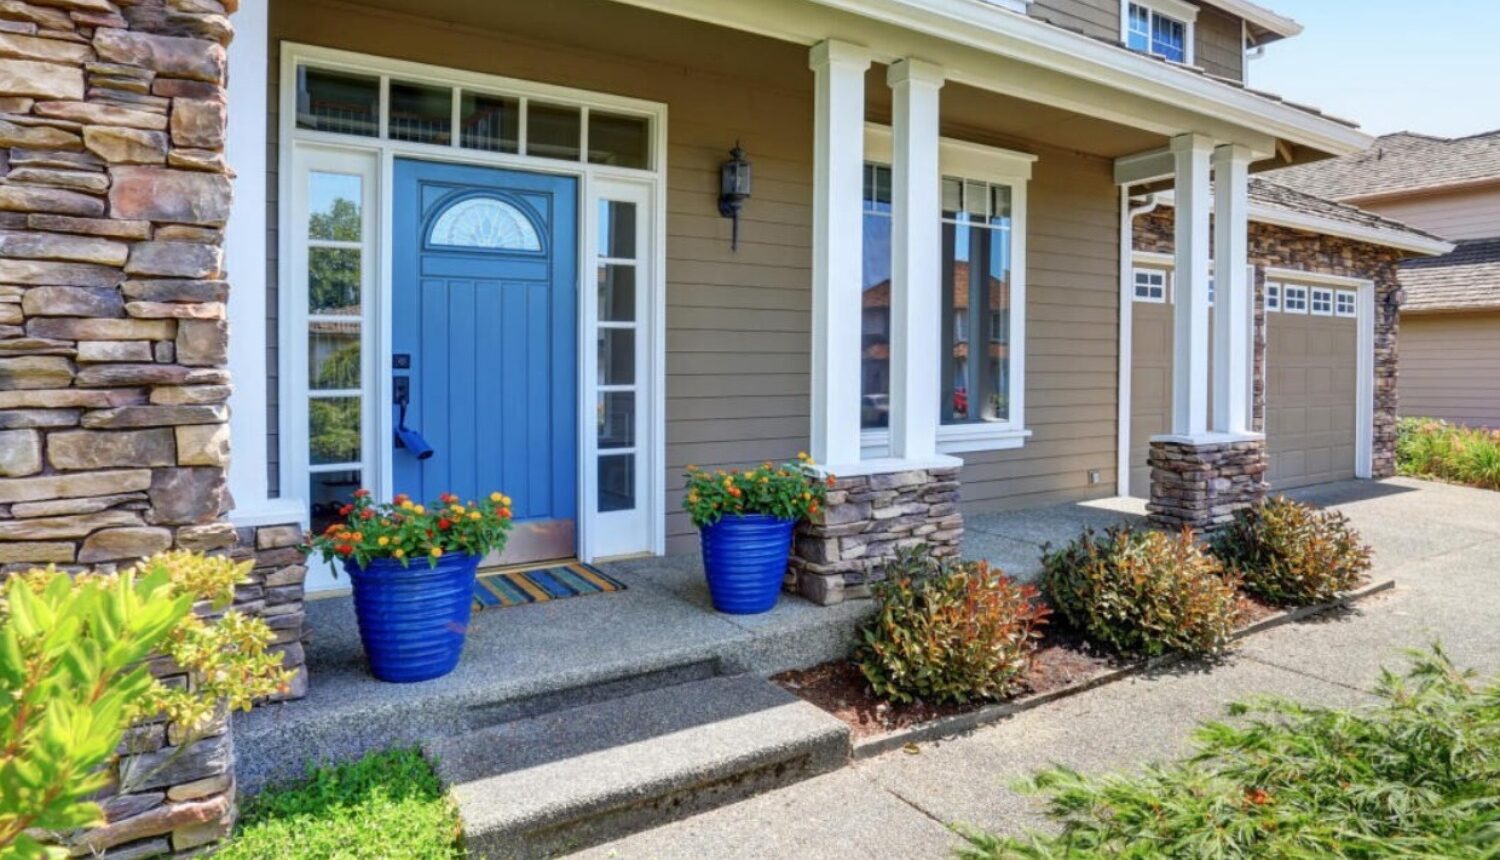 Freshly painted blue front door enhancing the home's spring curb appeal.